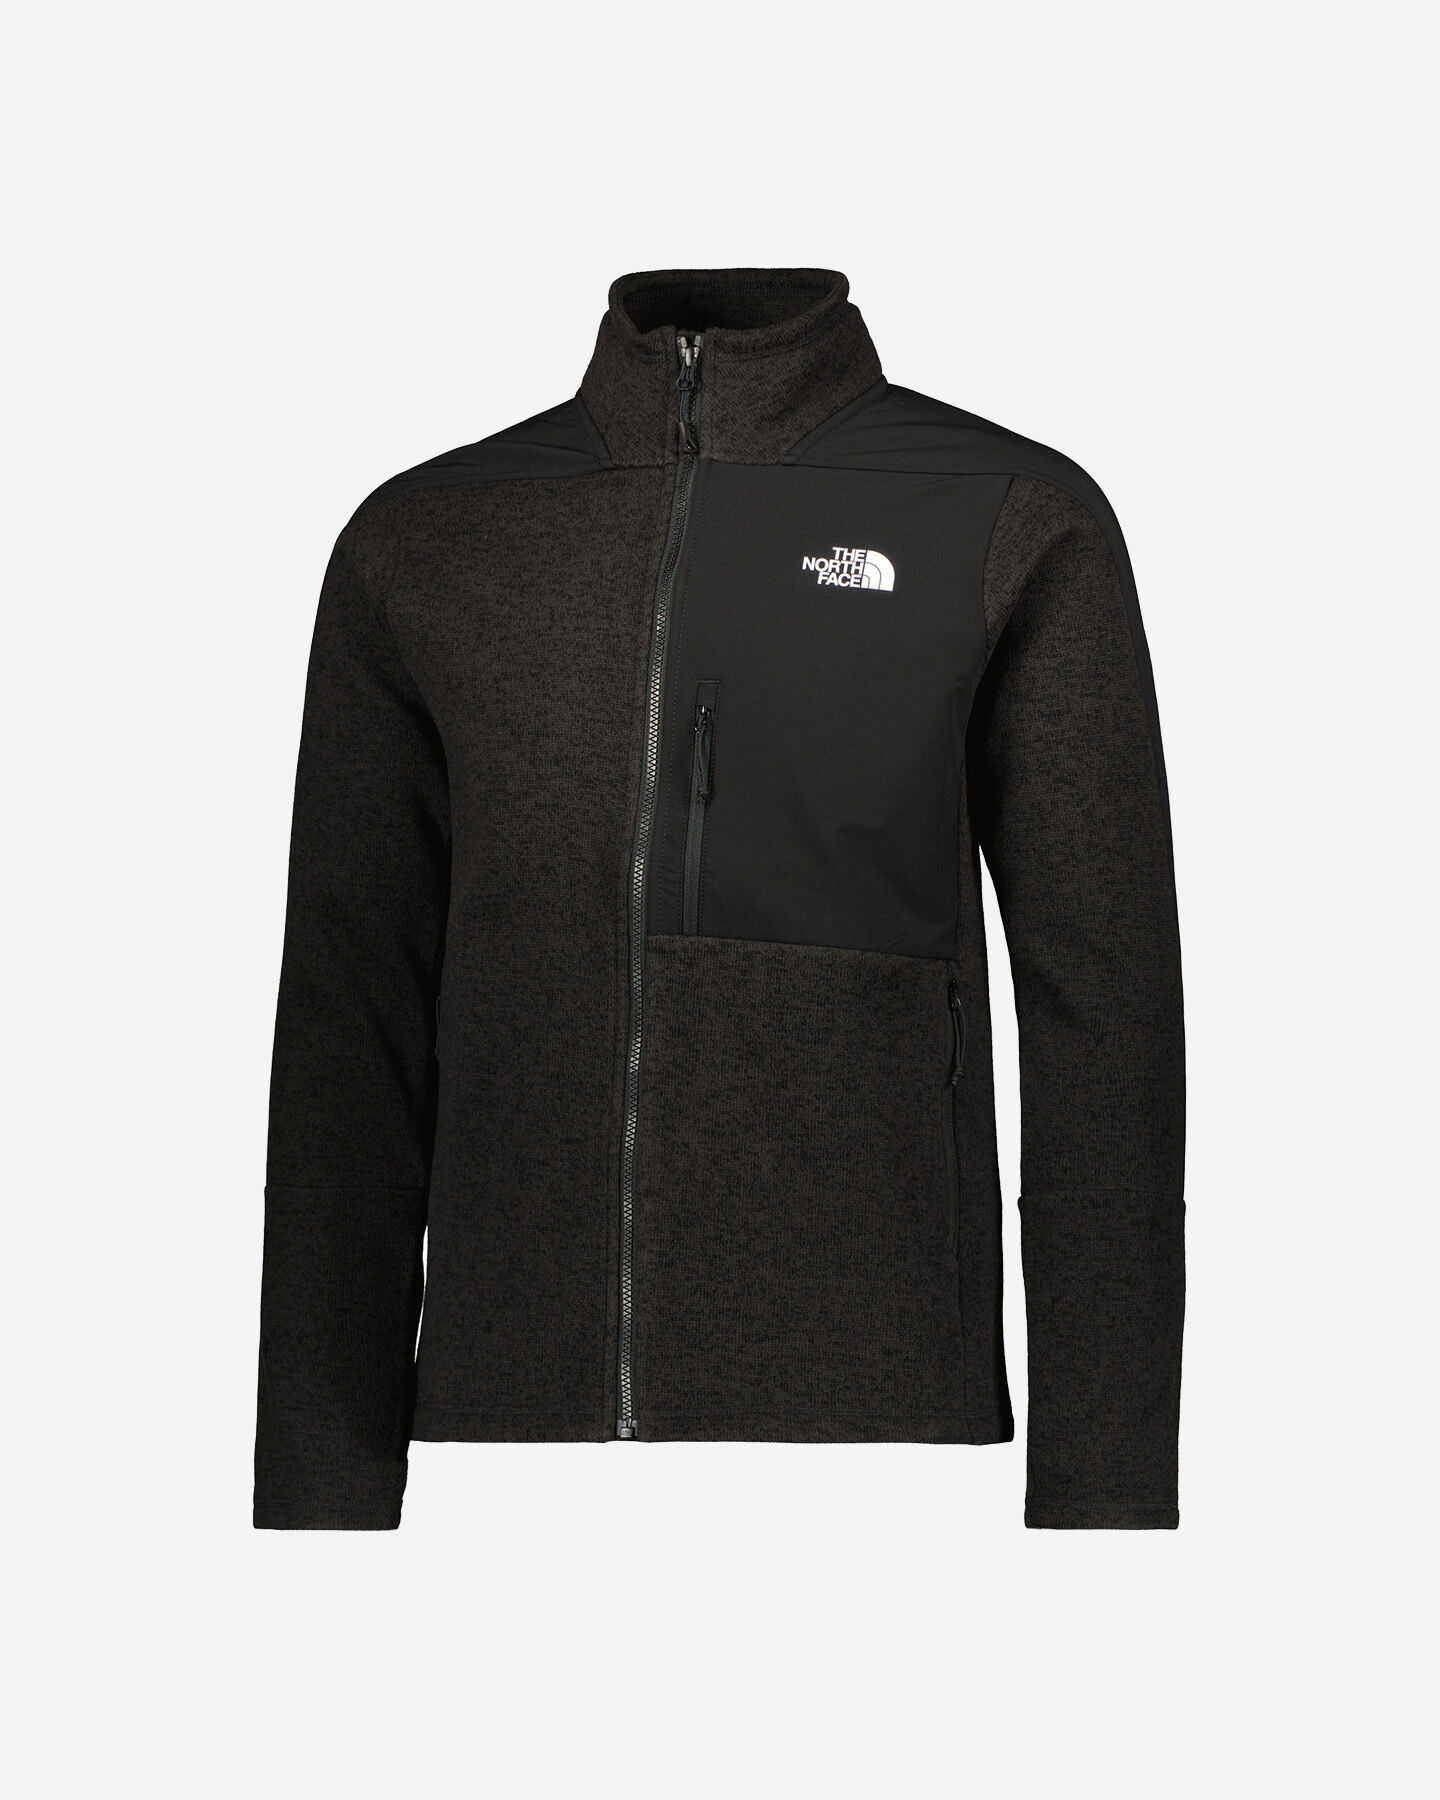  Pile THE NORTH FACE HYBRID M S5477965|PH5|XS scatto 0